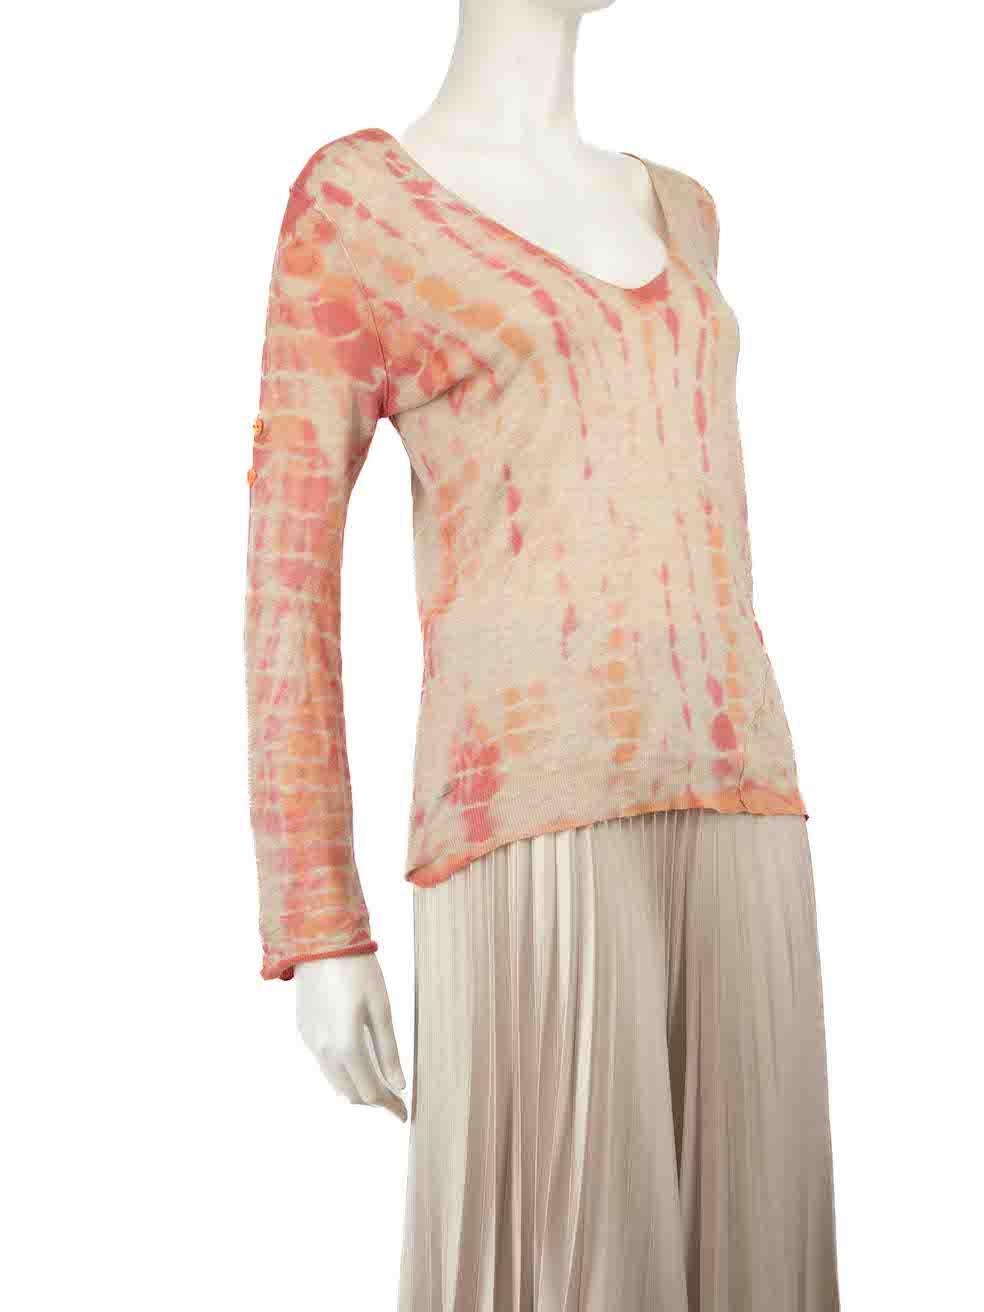 CONDITION is Very good. Hardly any visible wear to top is evident on this used Zadig & Voltaire designer resale item.
 
 
 
 Details
 
 
 Multicolour- pink, beige, orange
 
 Cotton
 
 Top
 
 Abstract pattern
 
 Long sleeves
 
 V-neck
 
 Button